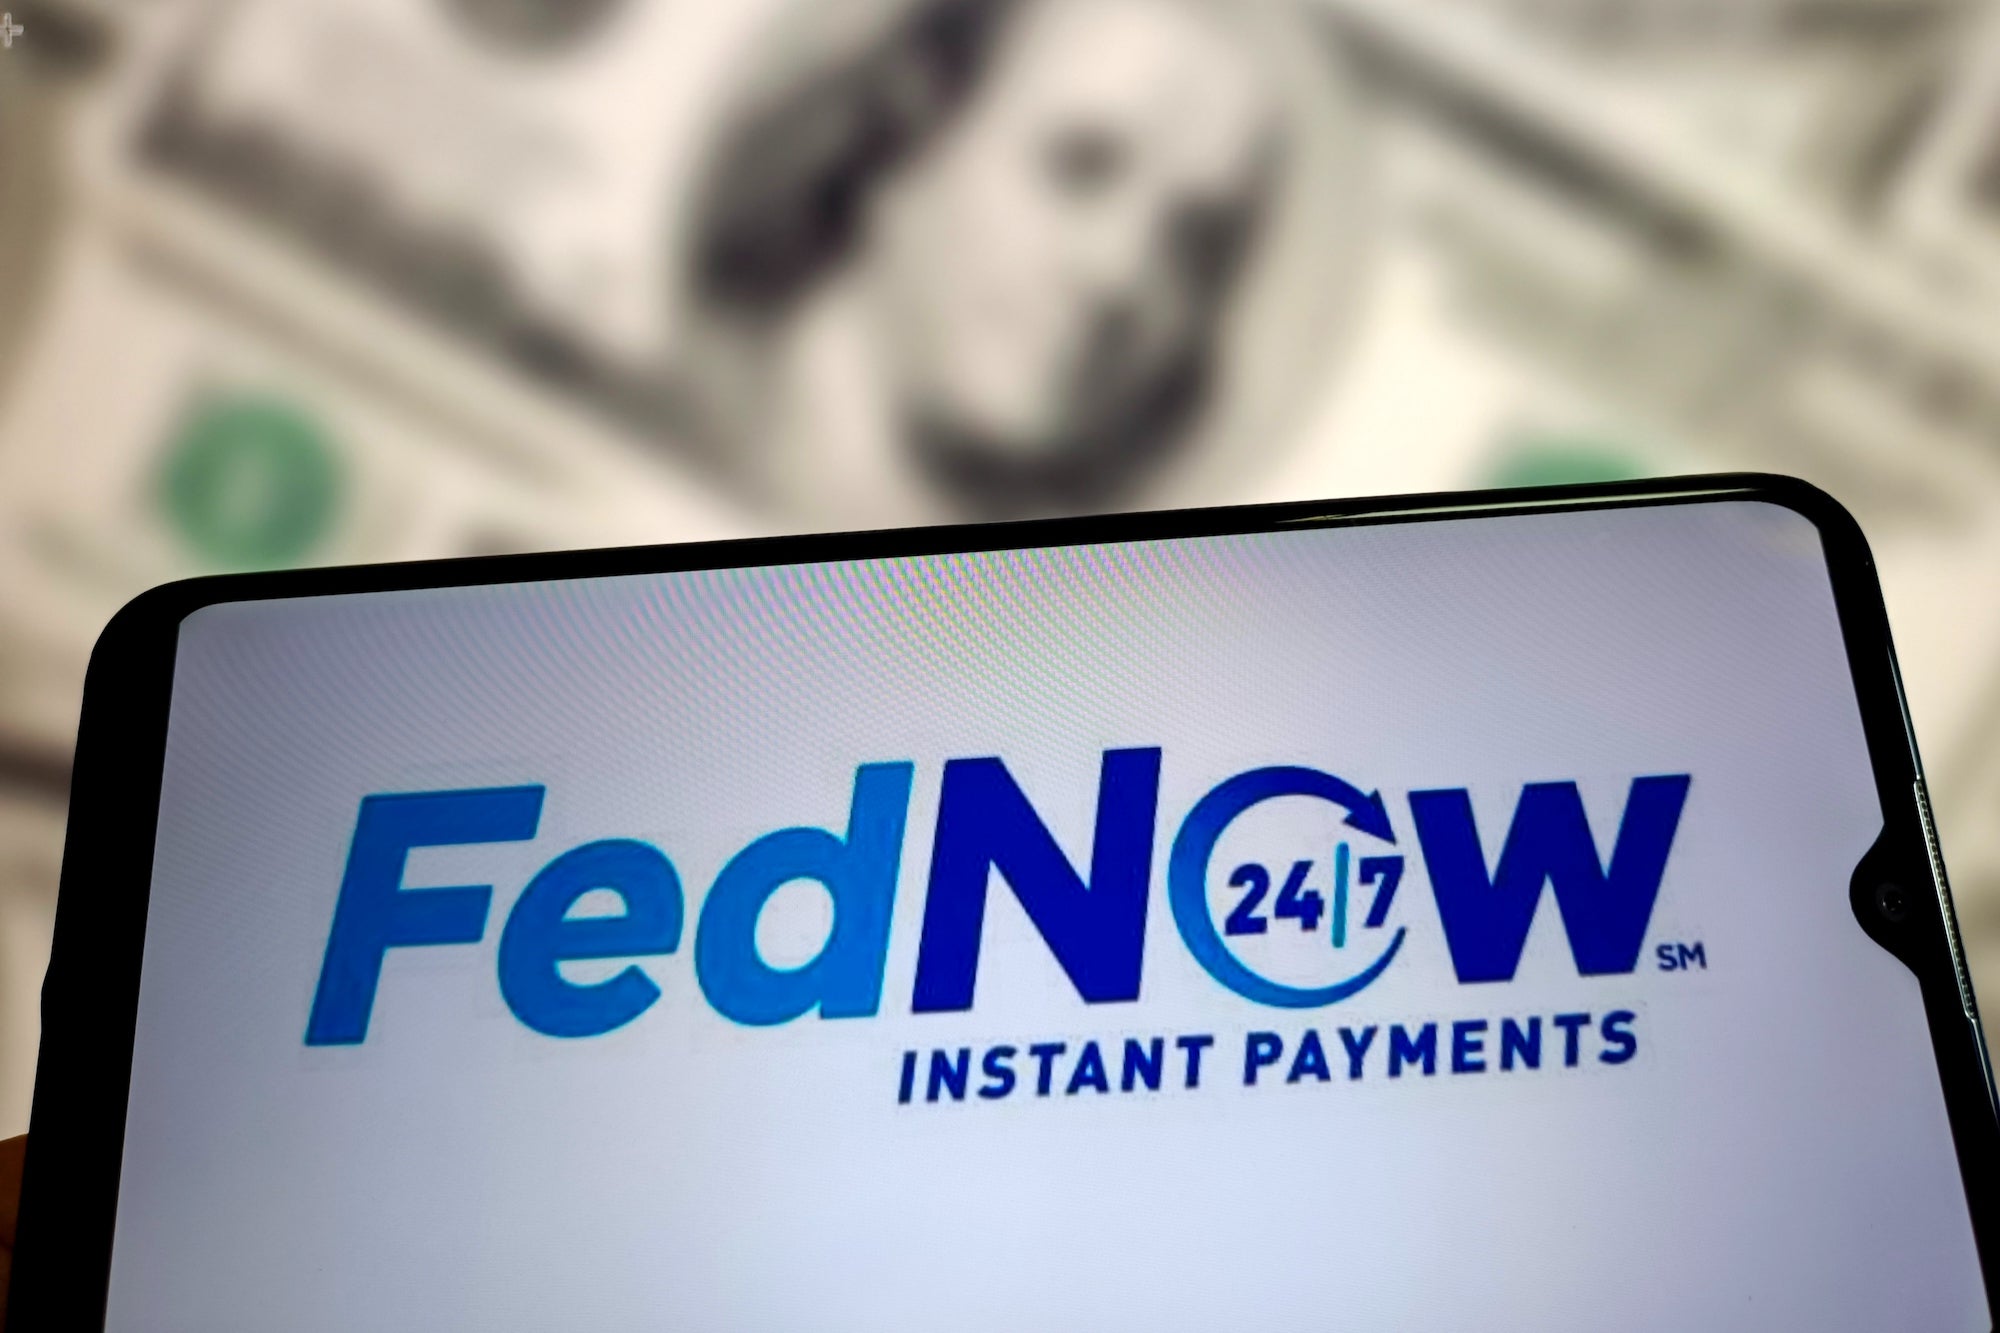 fednows-legal-terms-provide-an-opportunity-for-digital-wallets-and-payment-apps